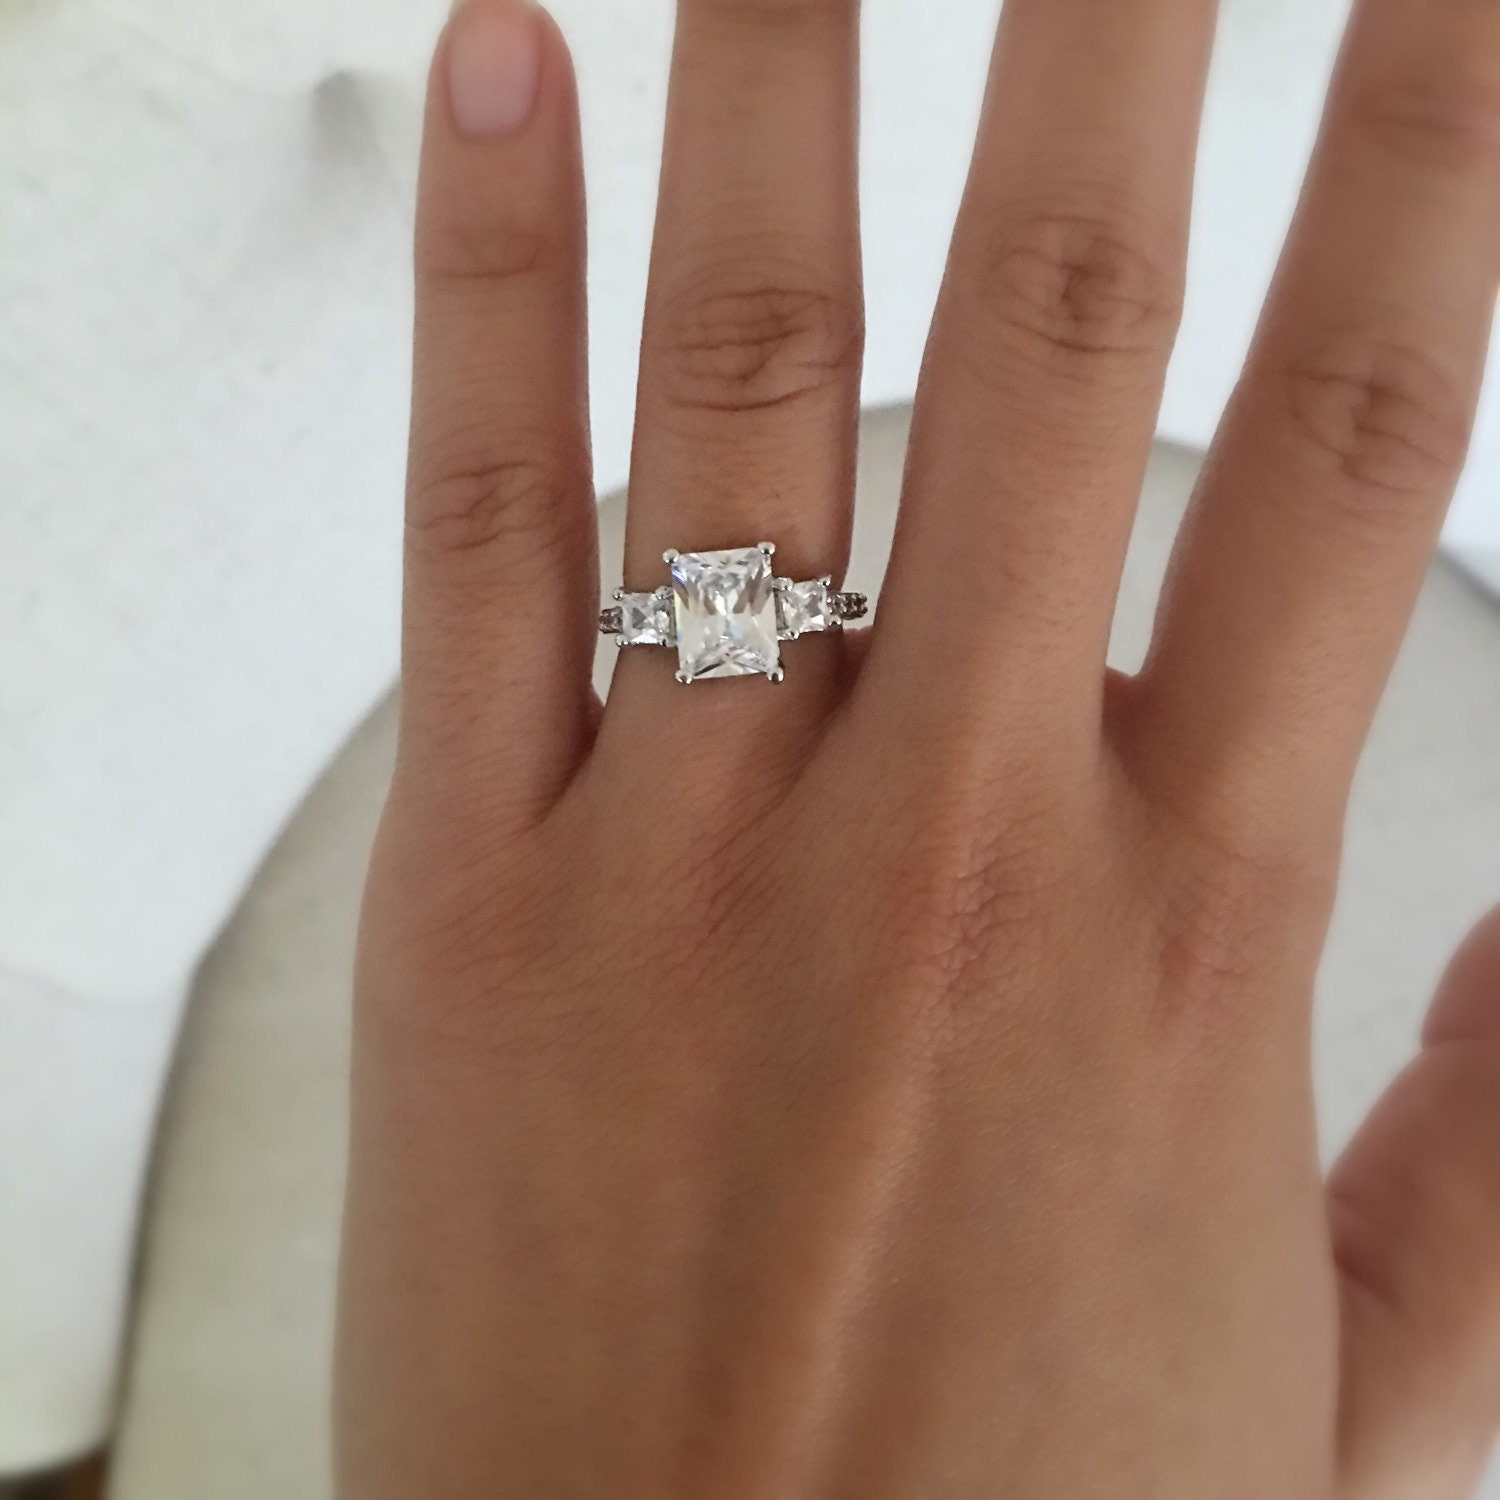 Emerald cut rectangle engagement ring wedding ring promise